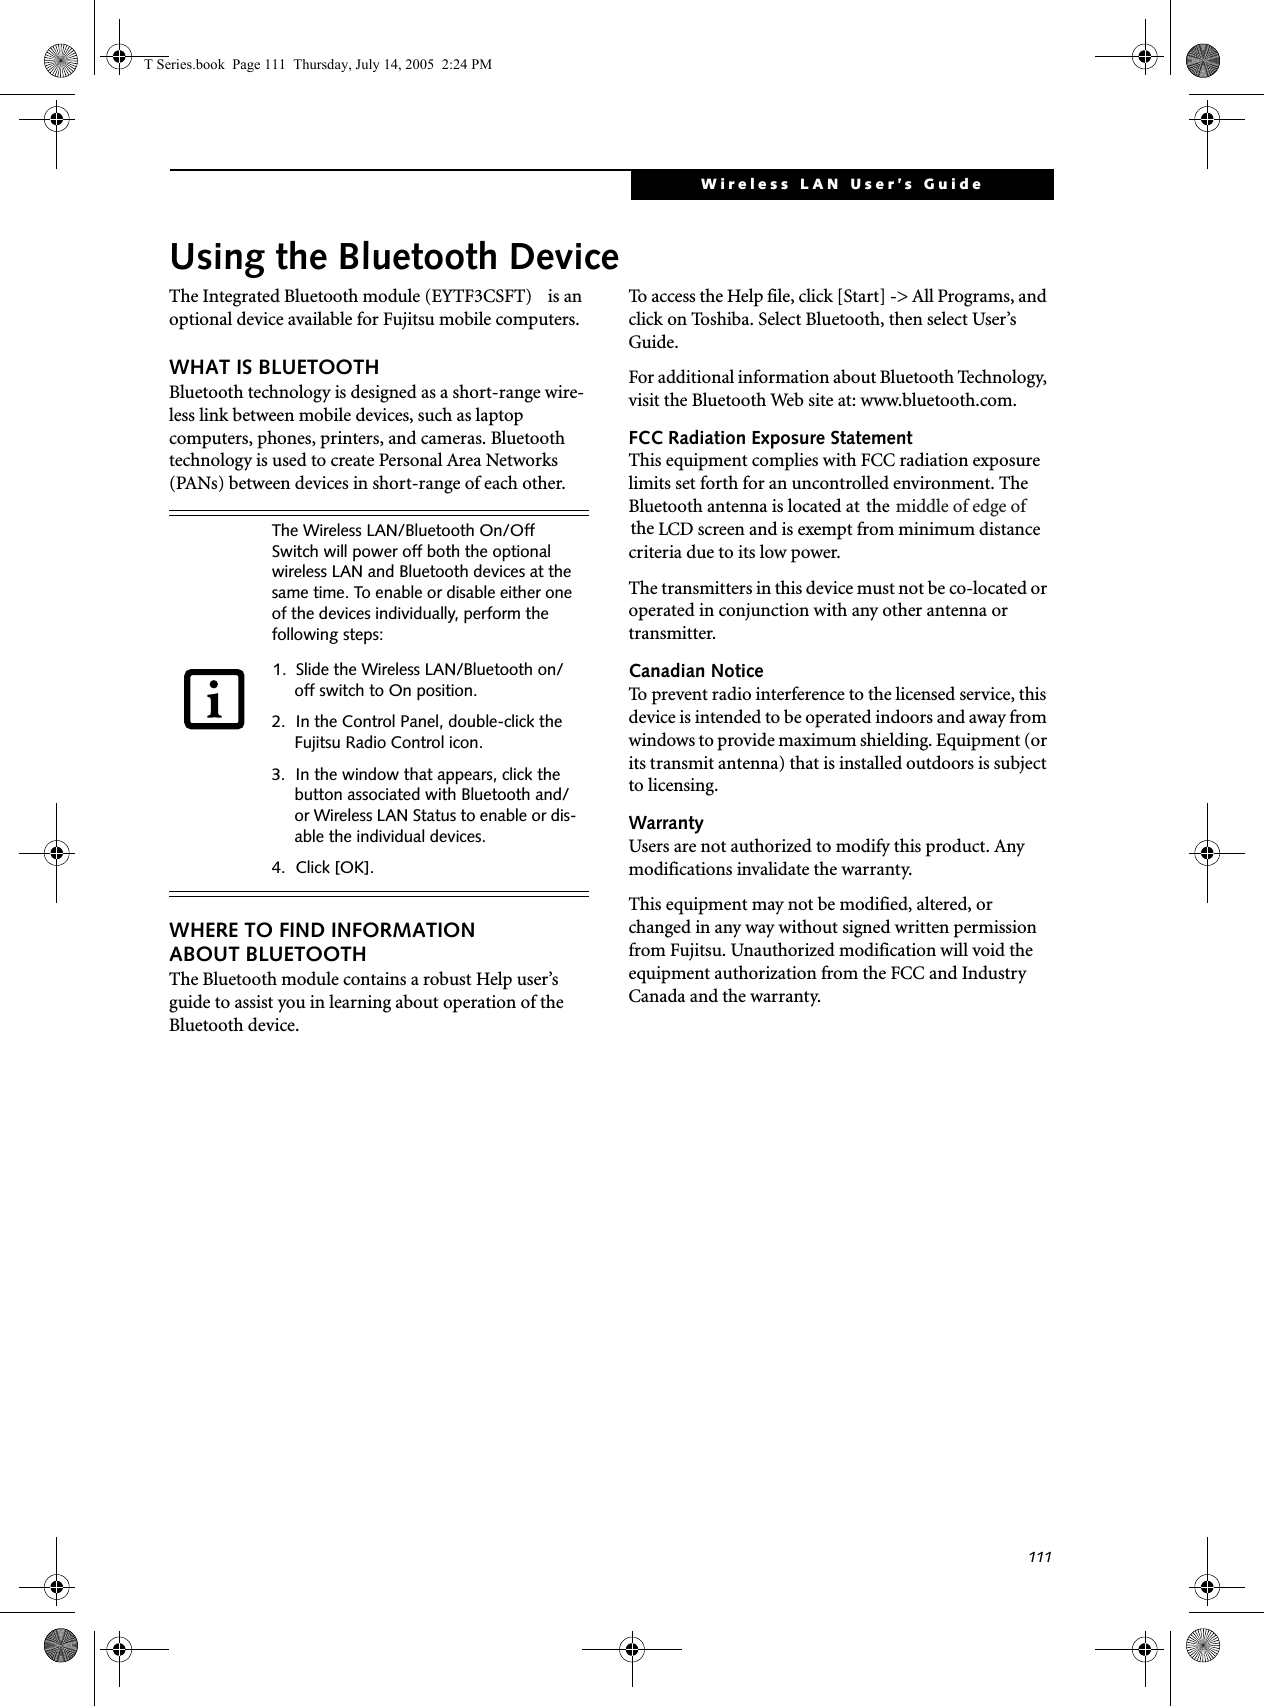 111Wireless LAN User’s Guide Using the Bluetooth DeviceThe Integrated Bluetooth module (EYTF3CSFT)  is an optional device available for Fujitsu mobile computers. WHAT IS BLUETOOTHBluetooth technology is designed as a short-range wire-less link between mobile devices, such as laptop computers, phones, printers, and cameras. Bluetooth technology is used to create Personal Area Networks (PANs) between devices in short-range of each other. WHERE TO FIND INFORMATIONABOUT BLUETOOTHThe Bluetooth module contains a robust Help user’s guide to assist you in learning about operation of the Bluetooth device.To access the Help file, click [Start] -&gt; All Programs, and click on Toshiba. Select Bluetooth, then select User’s Guide.For additional information about Bluetooth Technology, visit the Bluetooth Web site at: www.bluetooth.com.FCC Radiation Exposure StatementThis equipment complies with FCC radiation exposure limits set forth for an uncontrolled environment. The Bluetooth antenna is located at  thethe LCD screen and is exempt from minimum distance criteria due to its low power. The transmitters in this device must not be co-located or operated in conjunction with any other antenna or transmitter.Canadian NoticeTo prevent radio interference to the licensed service, this device is intended to be operated indoors and away from windows to provide maximum shielding. Equipment (or its transmit antenna) that is installed outdoors is subject to licensing.WarrantyUsers are not authorized to modify this product. Any modifications invalidate the warranty.This equipment may not be modified, altered, or changed in any way without signed written permission from Fujitsu. Unauthorized modification will void the equipment authorization from the FCC and Industry Canada and the warranty.The Wireless LAN/Bluetooth On/Off Switch will power off both the optional wireless LAN and Bluetooth devices at the same time. To enable or disable either one of the devices individually, perform the following steps:1. Slide the Wireless LAN/Bluetooth on/off switch to On position.2. In the Control Panel, double-click the Fujitsu Radio Control icon.3. In the window that appears, click the button associated with Bluetooth and/or Wireless LAN Status to enable or dis-able the individual devices.4. Click [OK].T Series.book  Page 111  Thursday, July 14, 2005  2:24 PMmiddle of edge of